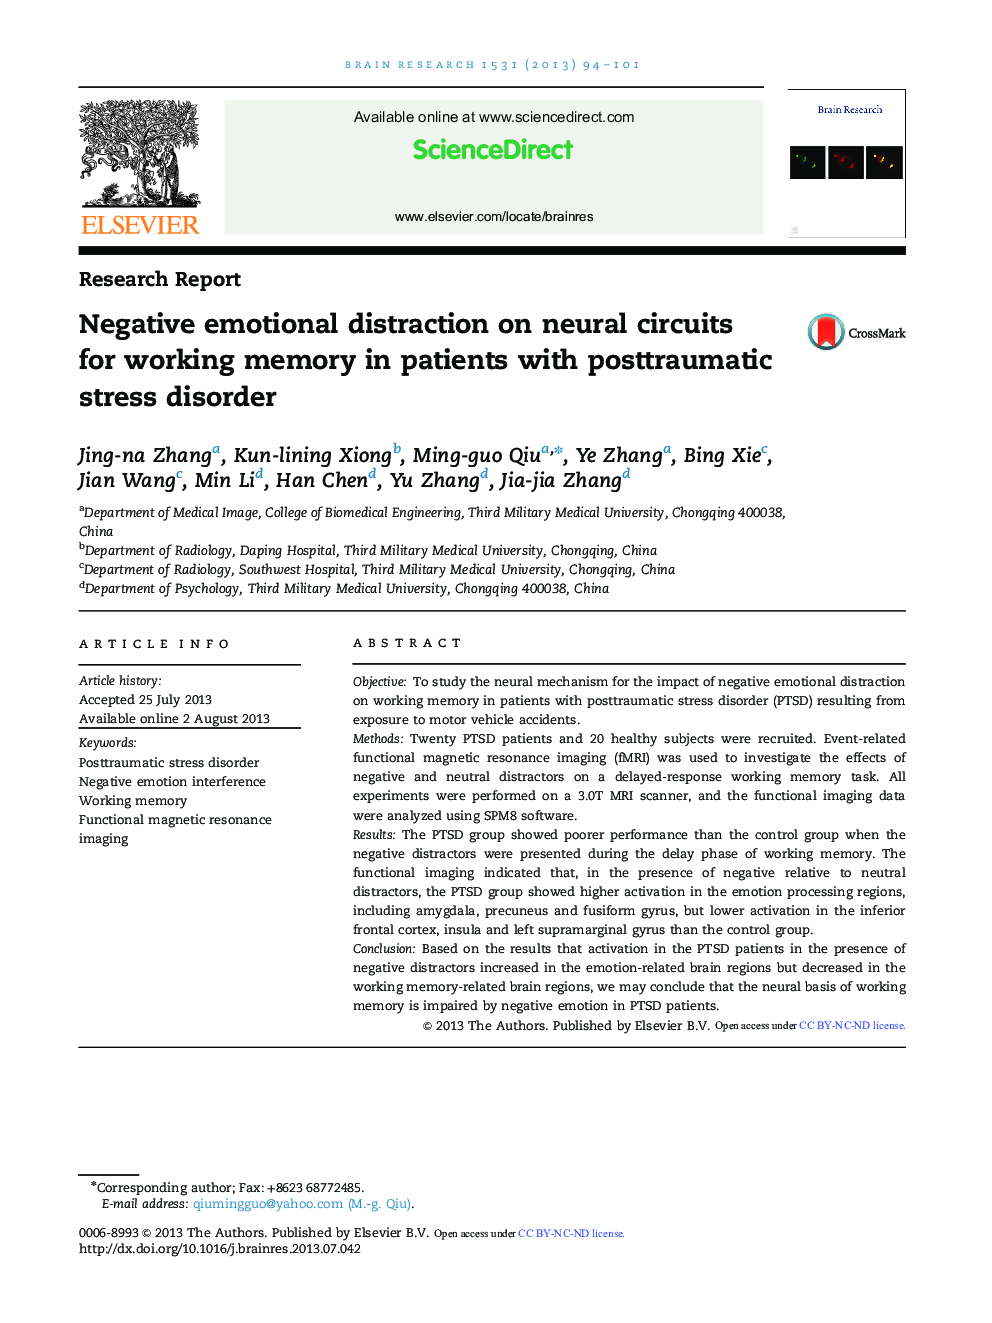 Research ReportNegative emotional distraction on neural circuits for working memory in patients with posttraumatic stress disorder